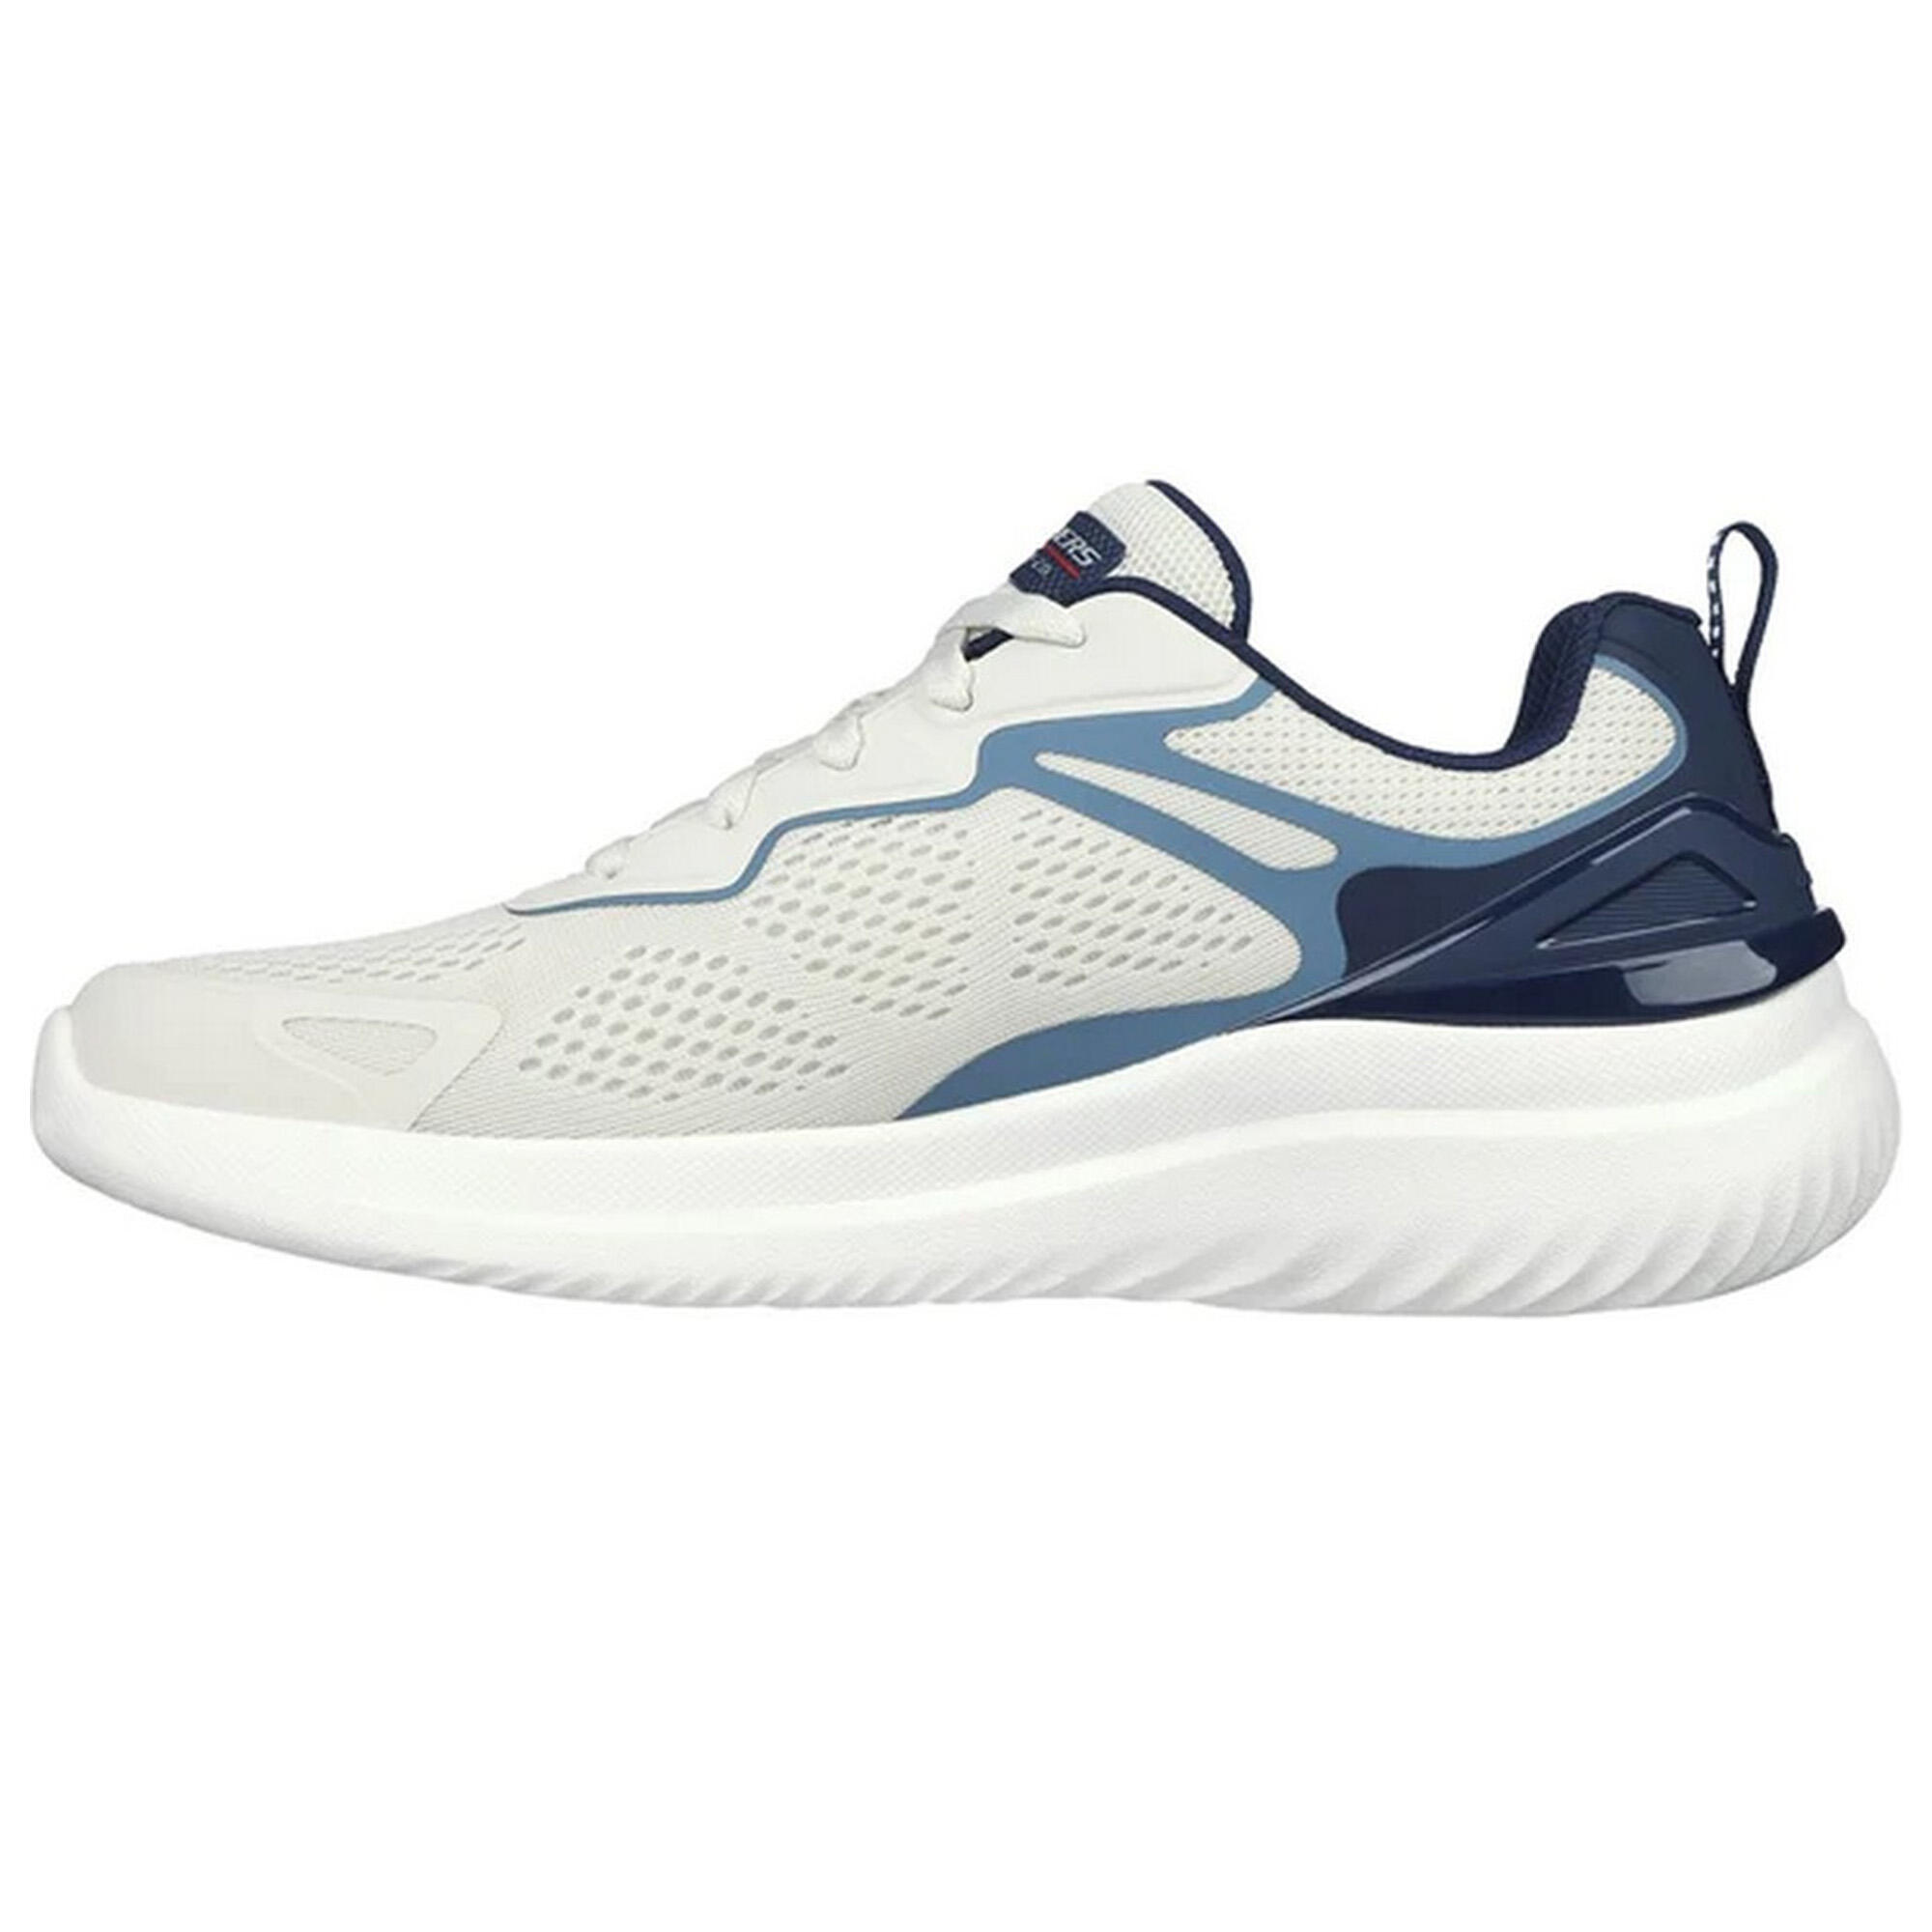 Mens Bounder 2.0 Andal Trainers (White/Navy) 2/5